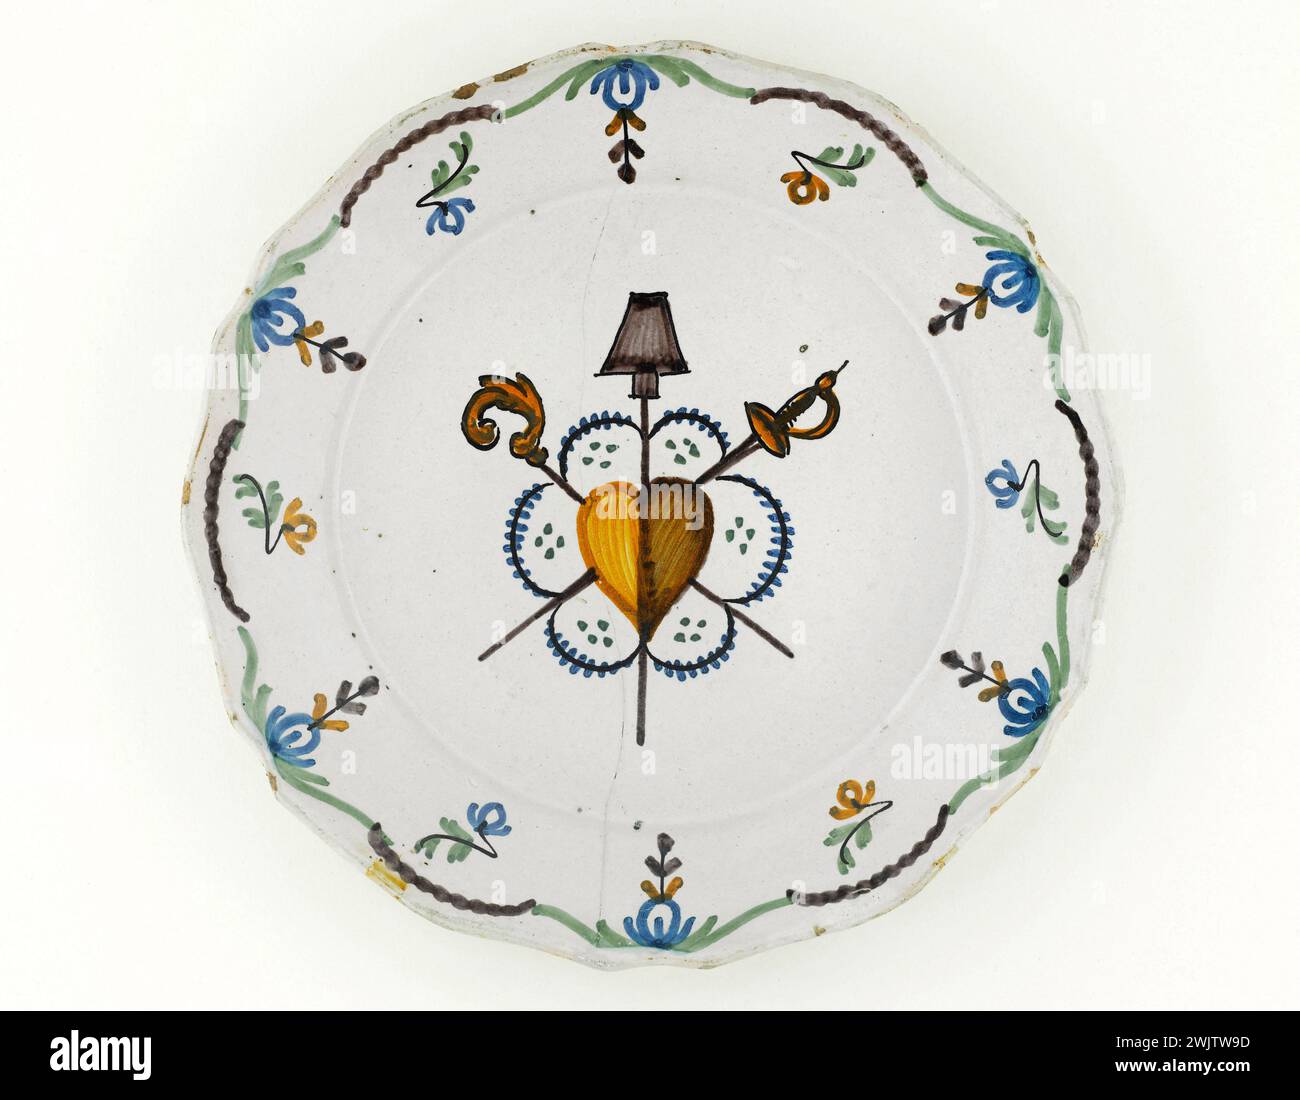 Anonymous. Plate. Earthenware. Around 1790. Paris, Carnavalet museum. 70955-57 Weapon, Heart, Epee, Faience, Decorative Pattern, Revolutionary Periode, Pic, Crockery, Putch Stock Photo